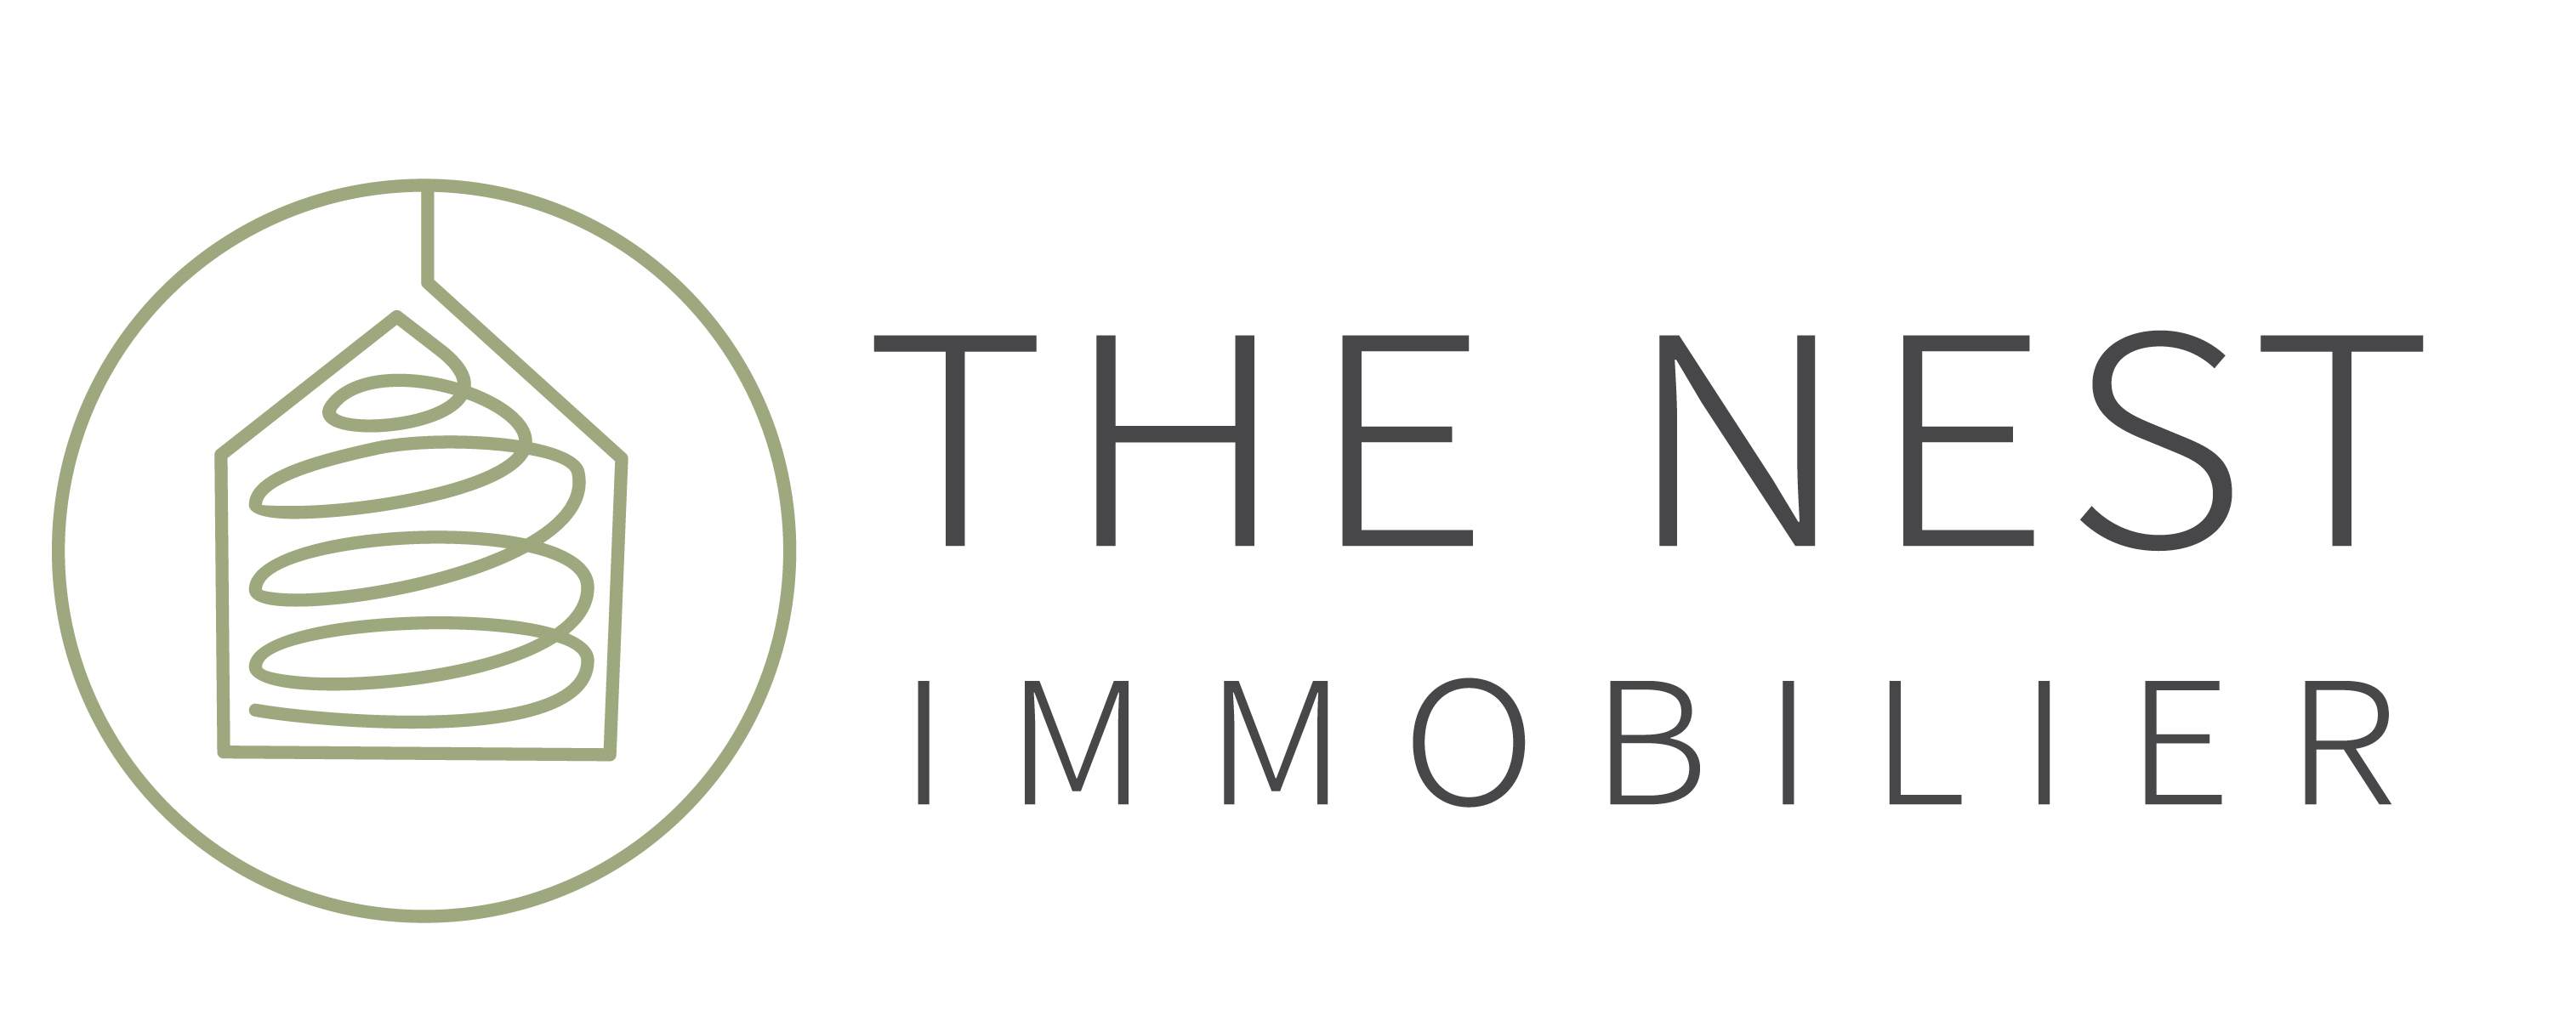 THE NEST IMMOBILIER ENSEIGNE 2